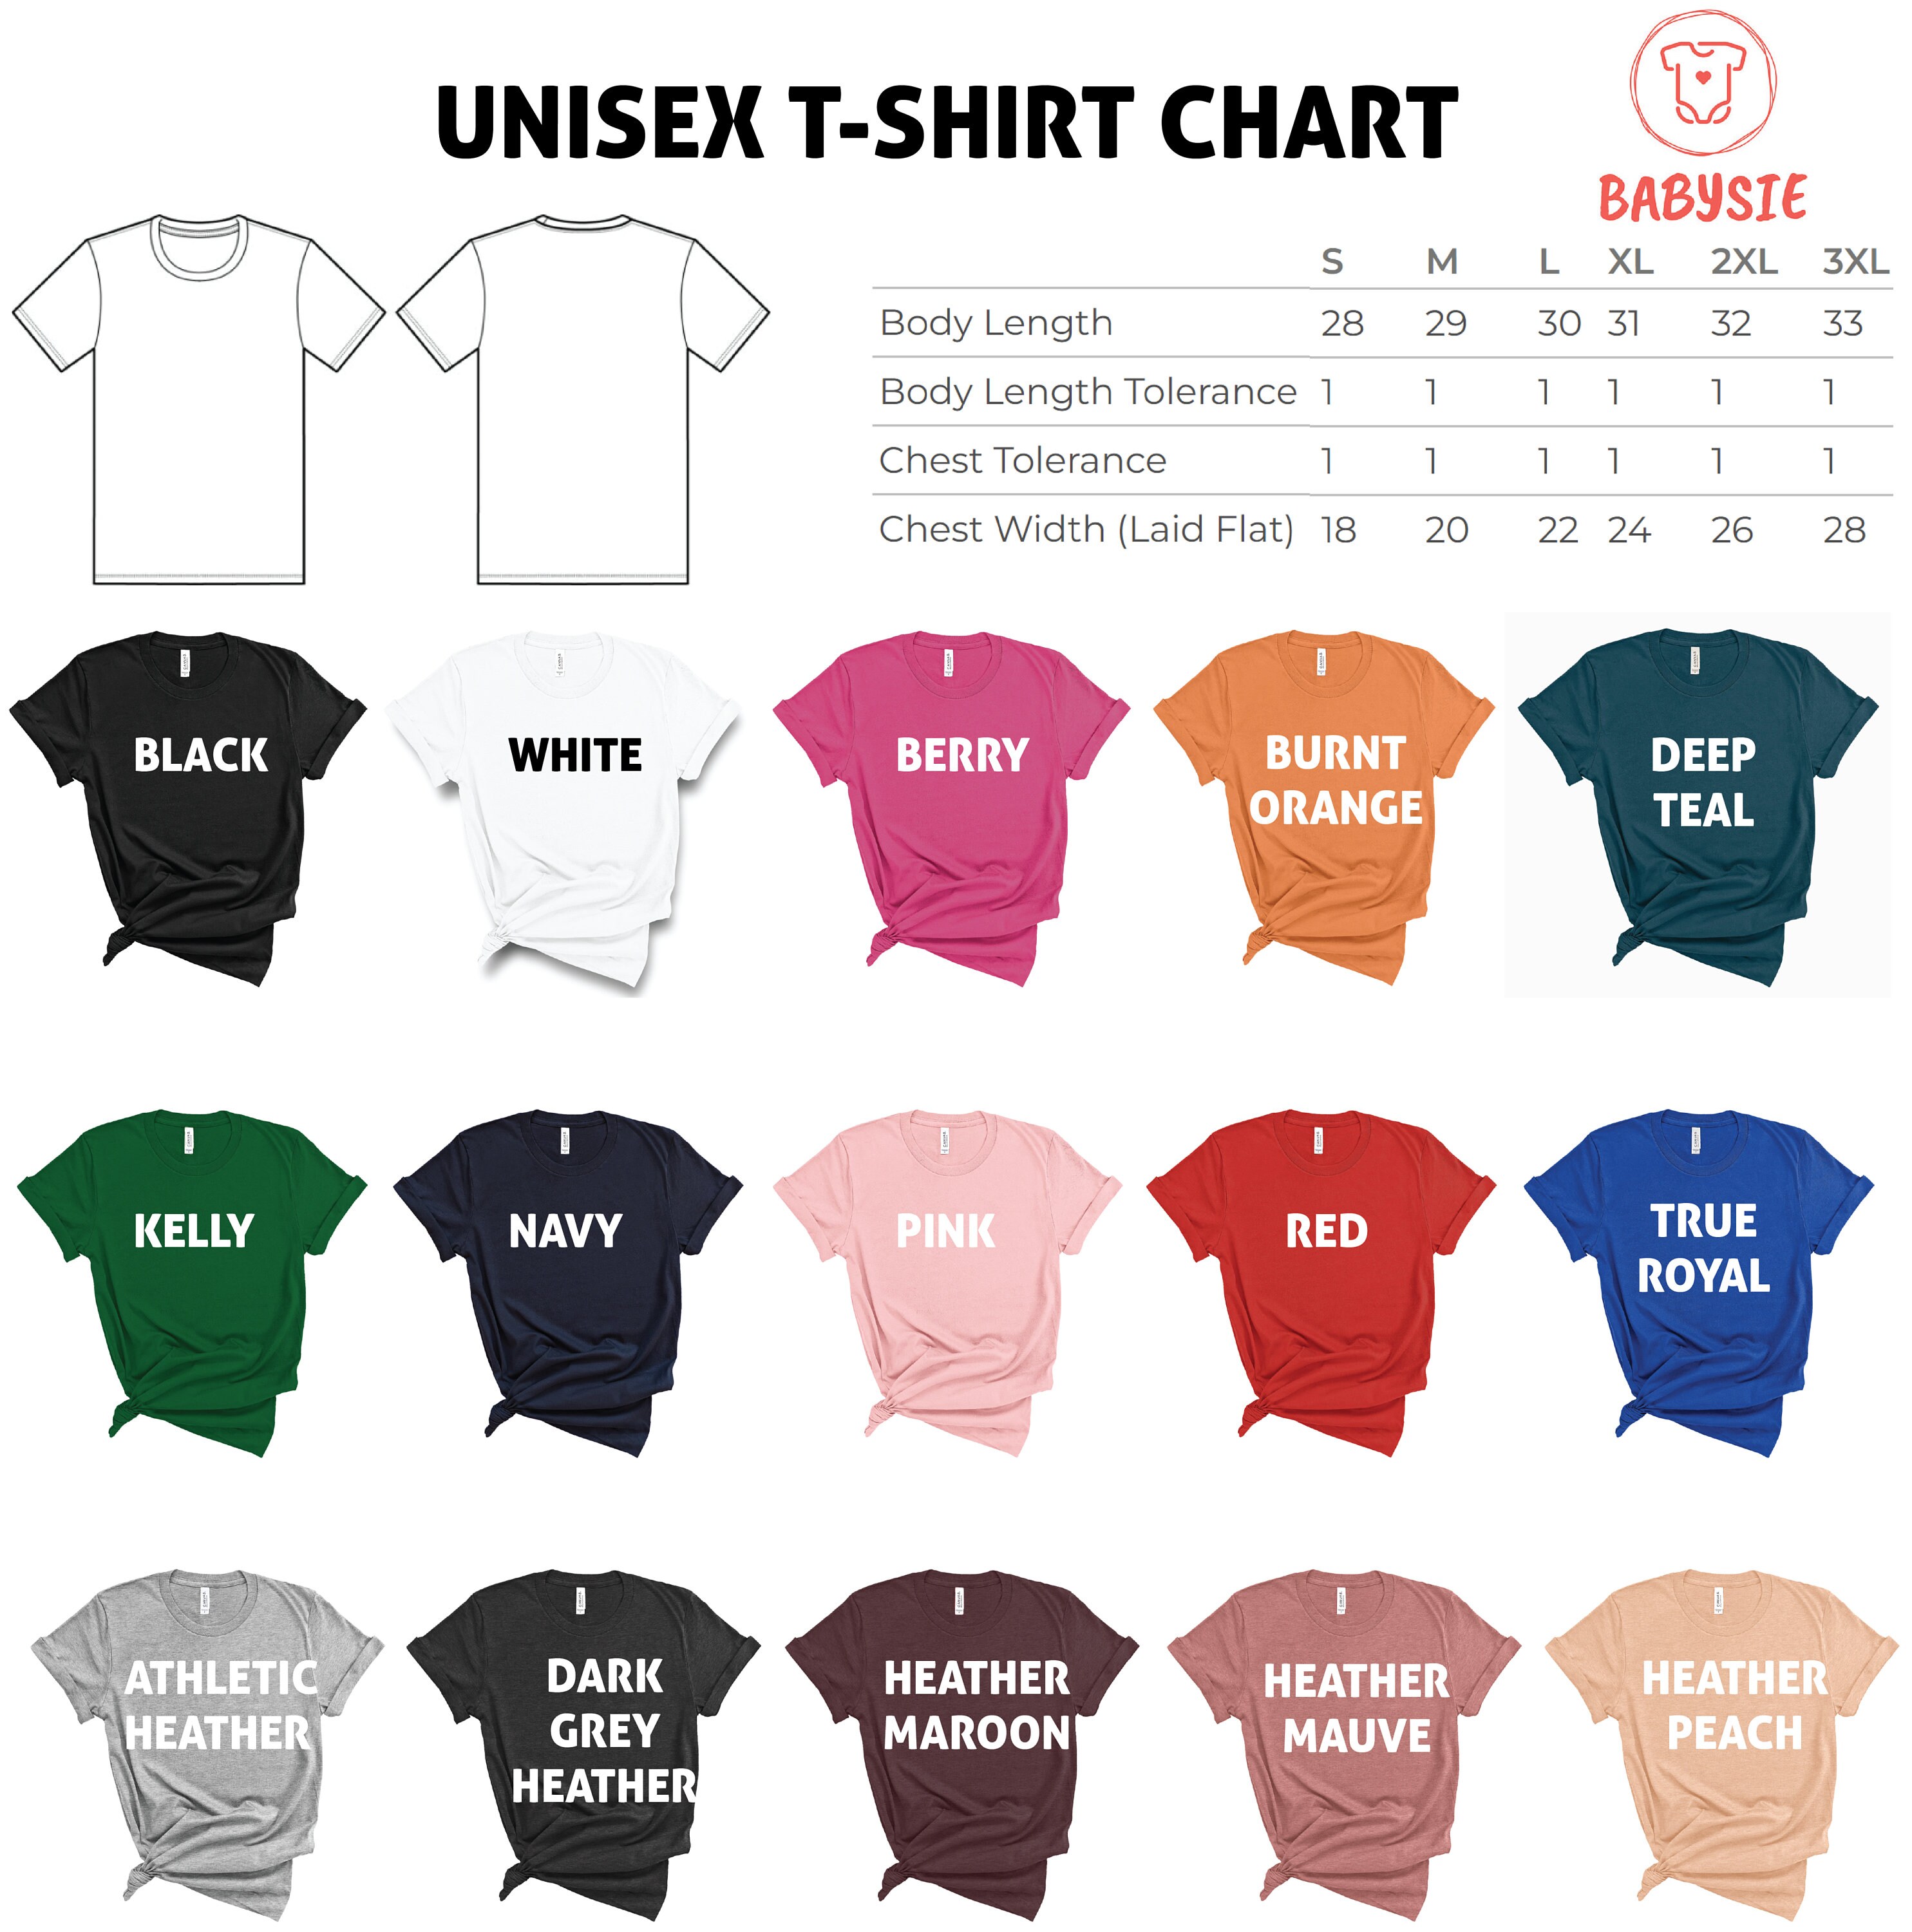 NO BRA CLUB Funny Letter Print Fashion Cotton O-Neck Personalized Exposed  Umbilical Women's Short T-shirt